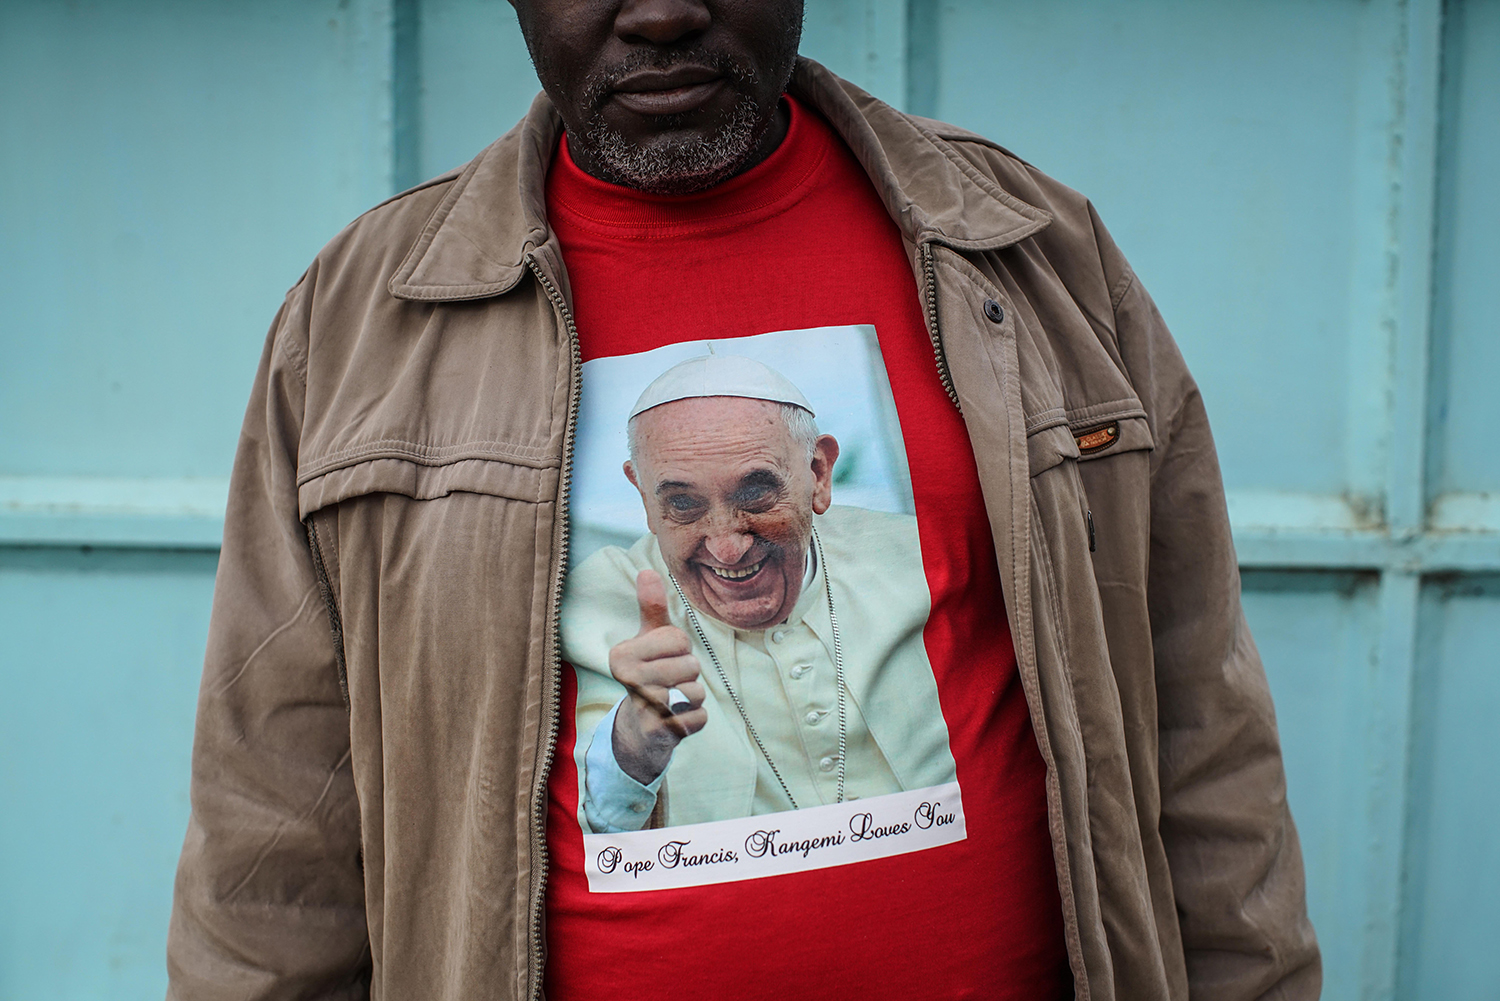 Father Paschal Mwijage of the St. Joseph the Worker Parish in Nairobi's Kangemi slum wears a t-shirt of Pope Francis on Nov. 24, 2015.